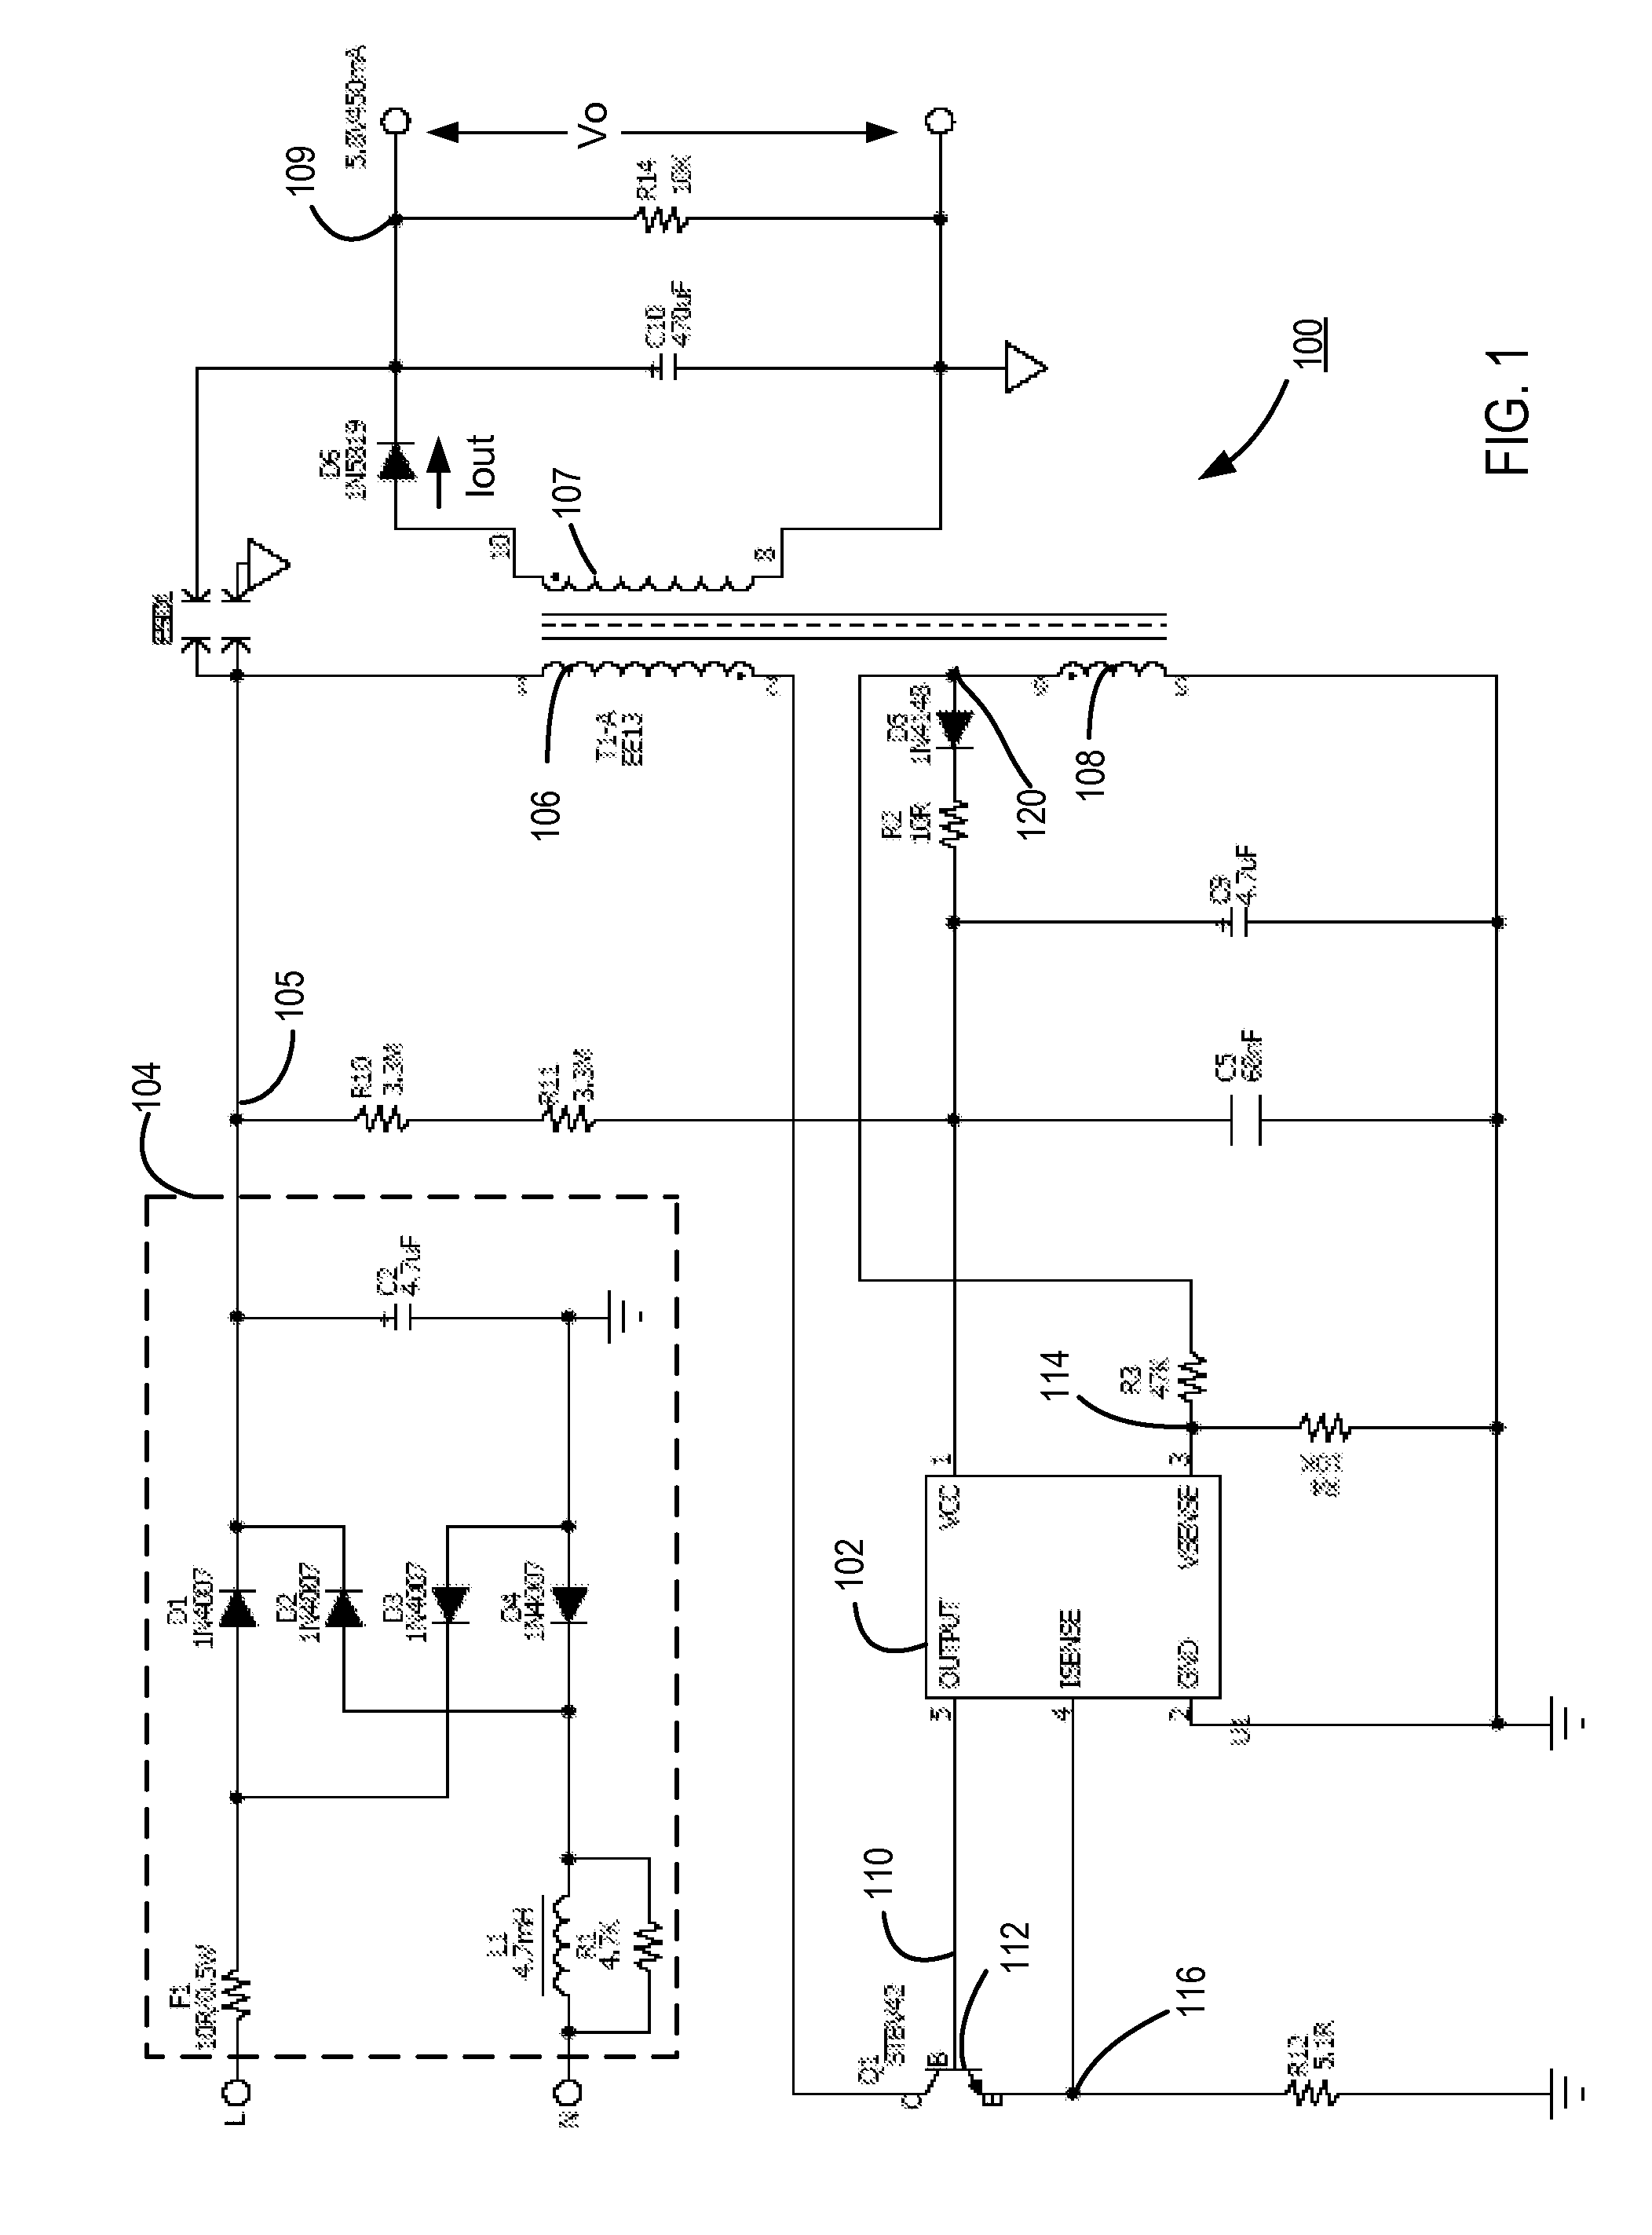 EMI Frequency Spreading Method for Switching Power Converter